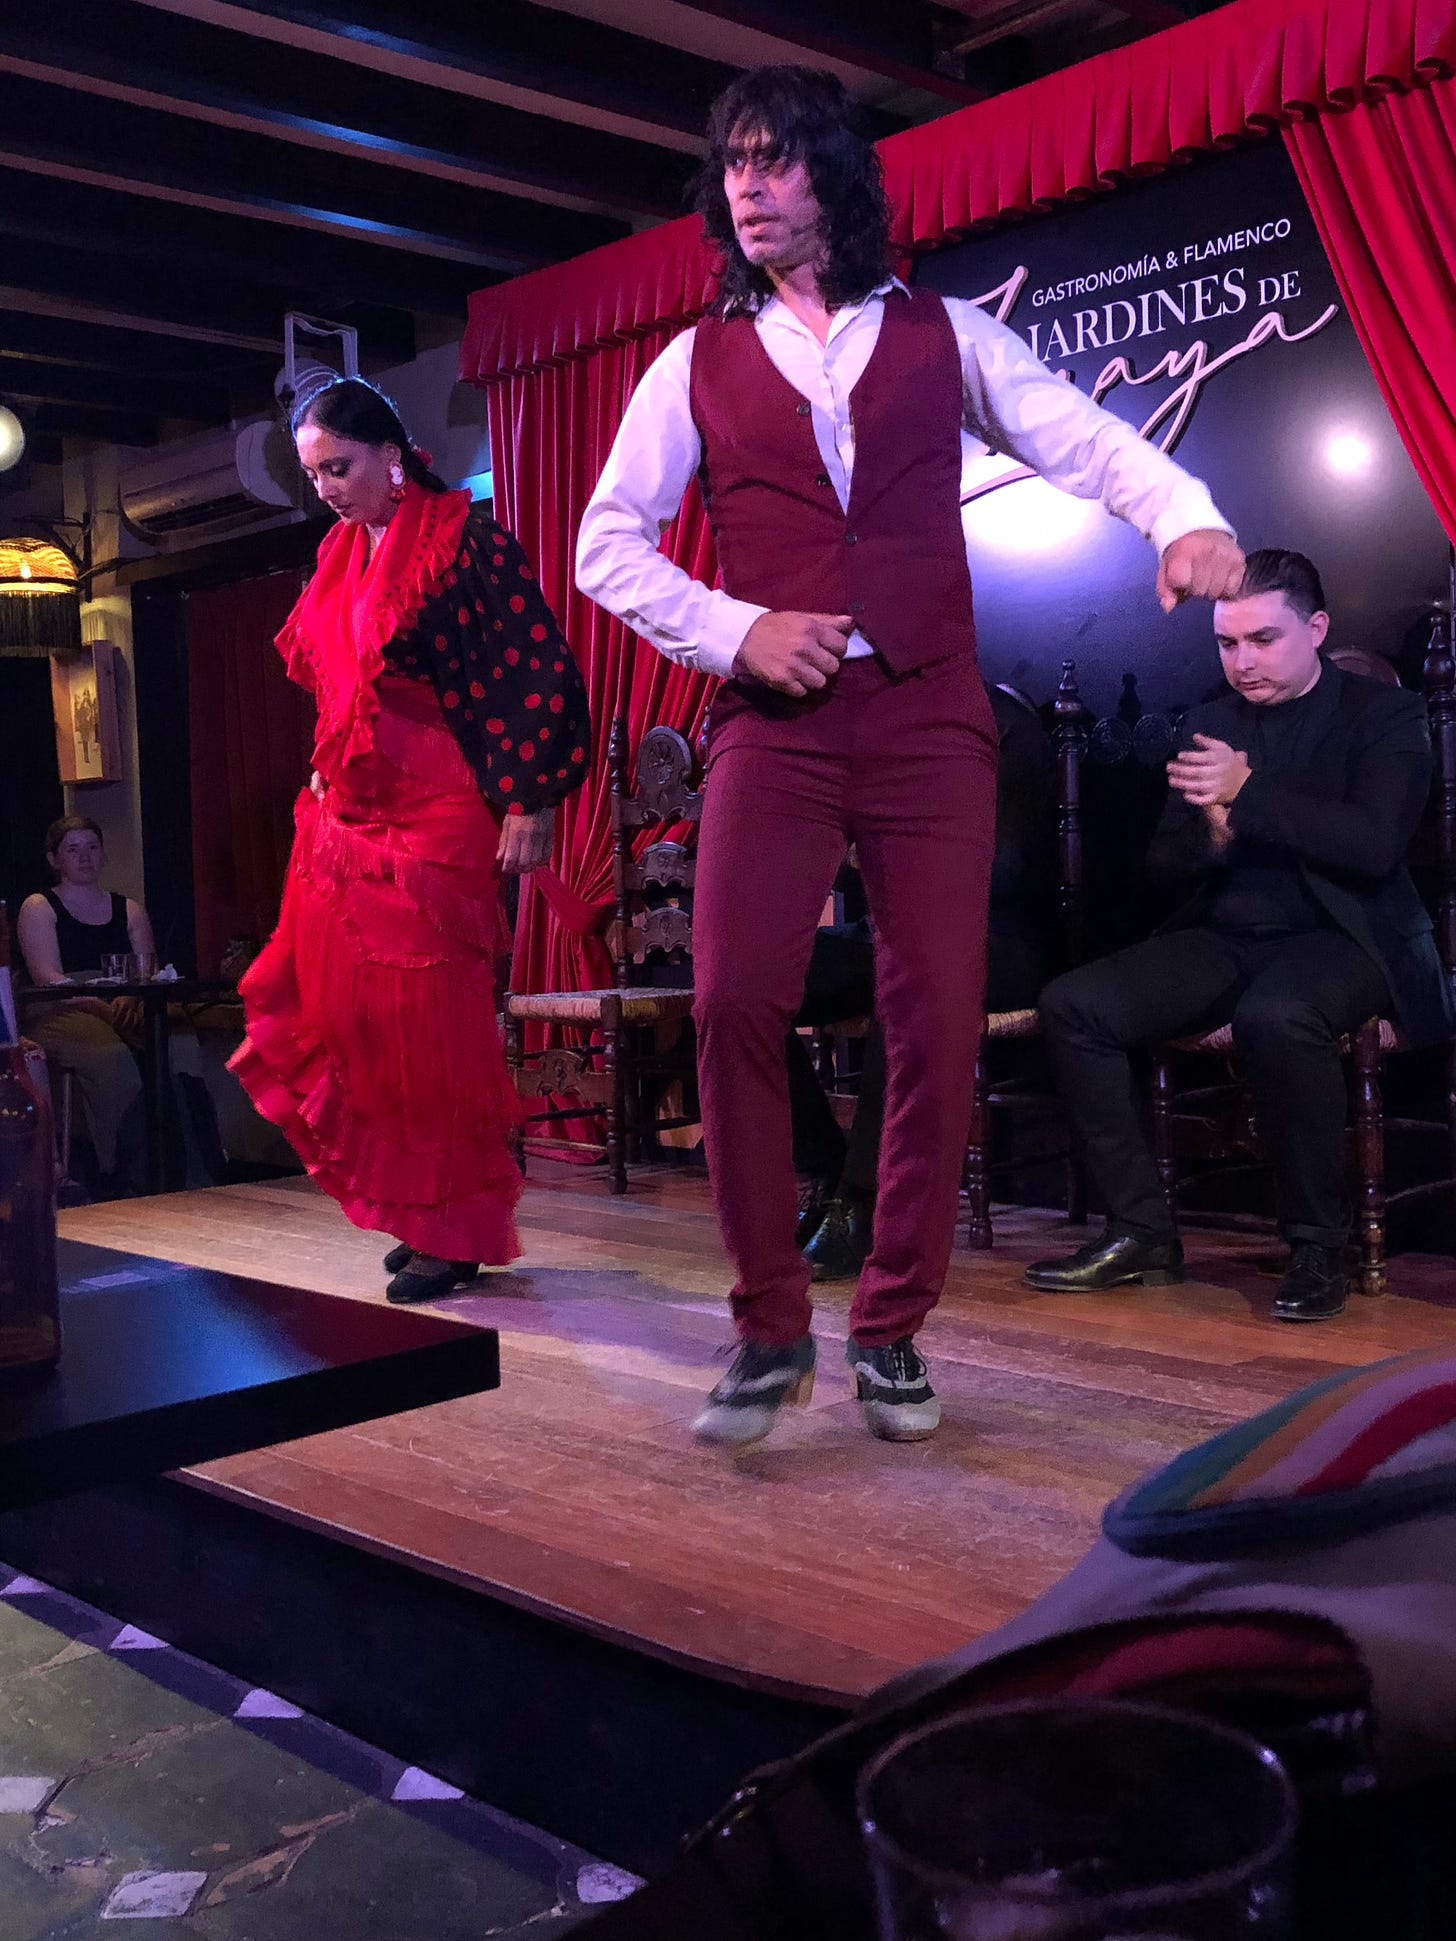 A picture of two flamenco dancers and a singer on stage in Granada